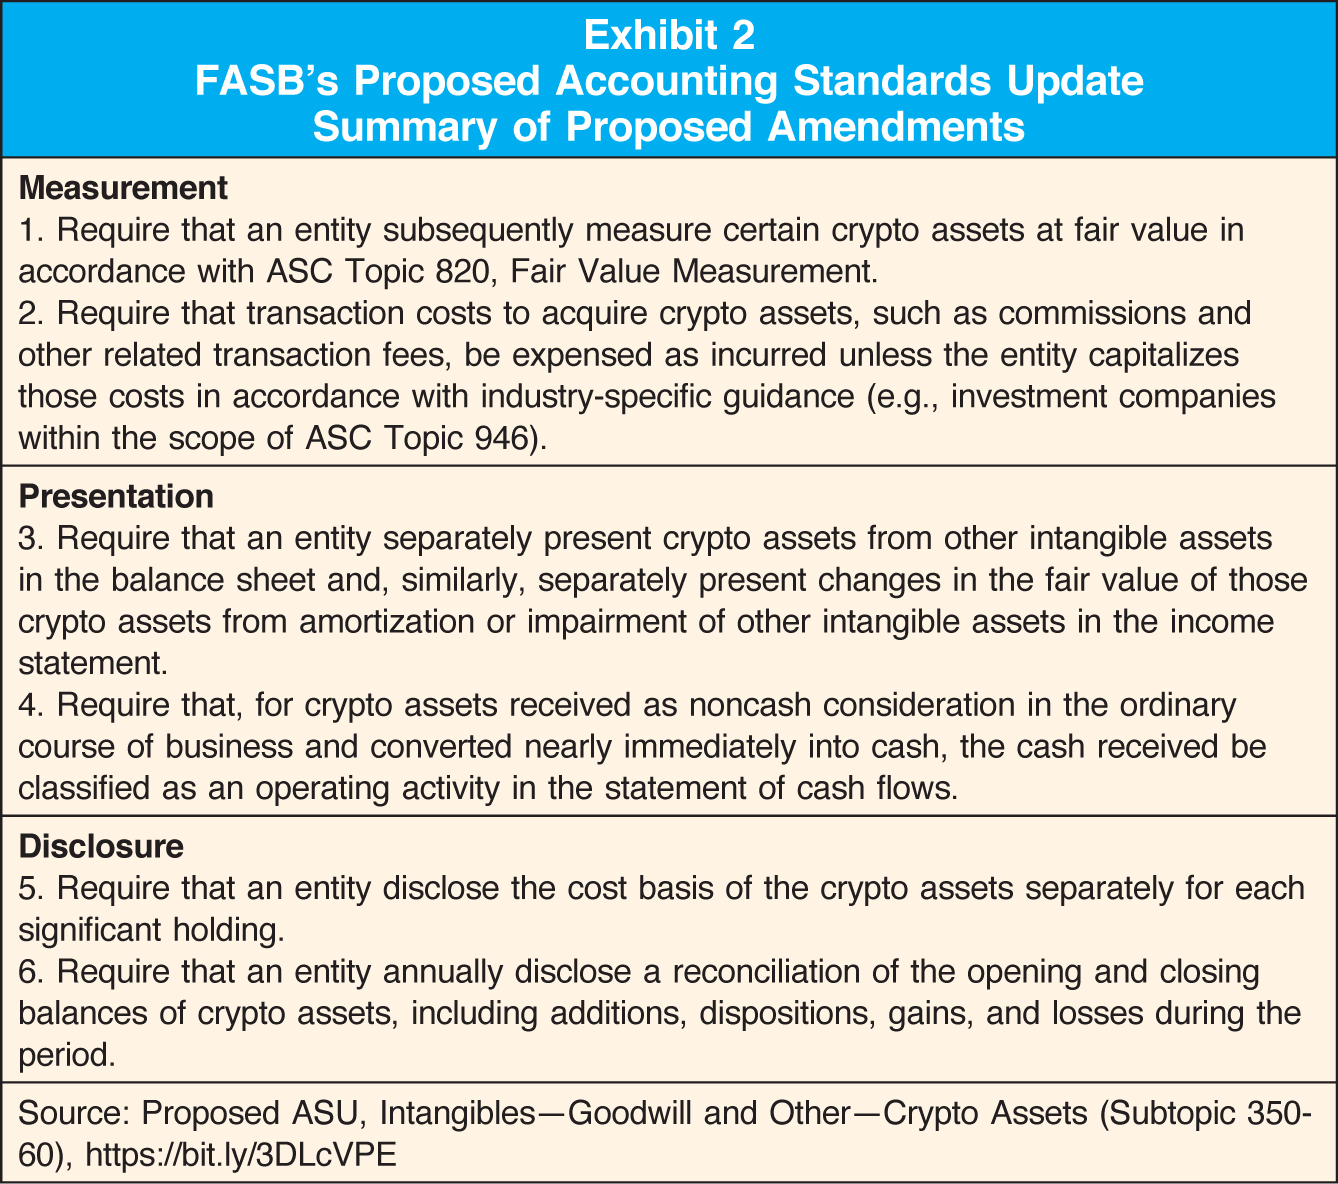 Measurement; 1. Require that an entity subsequently measure certain crypto assets at fair value in accordance with ASC Topic 820, Fair Value Measurement.; 2. Require that transaction costs to acquire crypto assets, such as commissions and other related transaction fees, be expensed as incurred unless the entity capitalizes those costs in accordance with industry-specific guidance (e.g., investment companies within the scope of ASC Topic 946). Presentation; 3. Require that an entity separately present crypto assets from other intangible assets in the balance sheet and, similarly, separately present changes in the fair value of those crypto assets from amortization or impairment of other intangible assets in the income statement.; 4. Require that, for crypto assets received as noncash consideration in the ordinary course of business and converted nearly immediately into cash, the cash received be classified as an operating activity in the statement of cash flows. Disclosure; 5. Require that an entity disclose the cost basis of the crypto assets separately for each significant holding.; 6. Require that an entity annually disclose a reconciliation of the opening and closing balances of crypto assets, including additions, dispositions, gains, and losses during the period. Source: Proposed ASU, Intangibles—Goodwill and Other—Crypto Assets (Subtopic 350-60), https://bit.ly/3DLcVPE